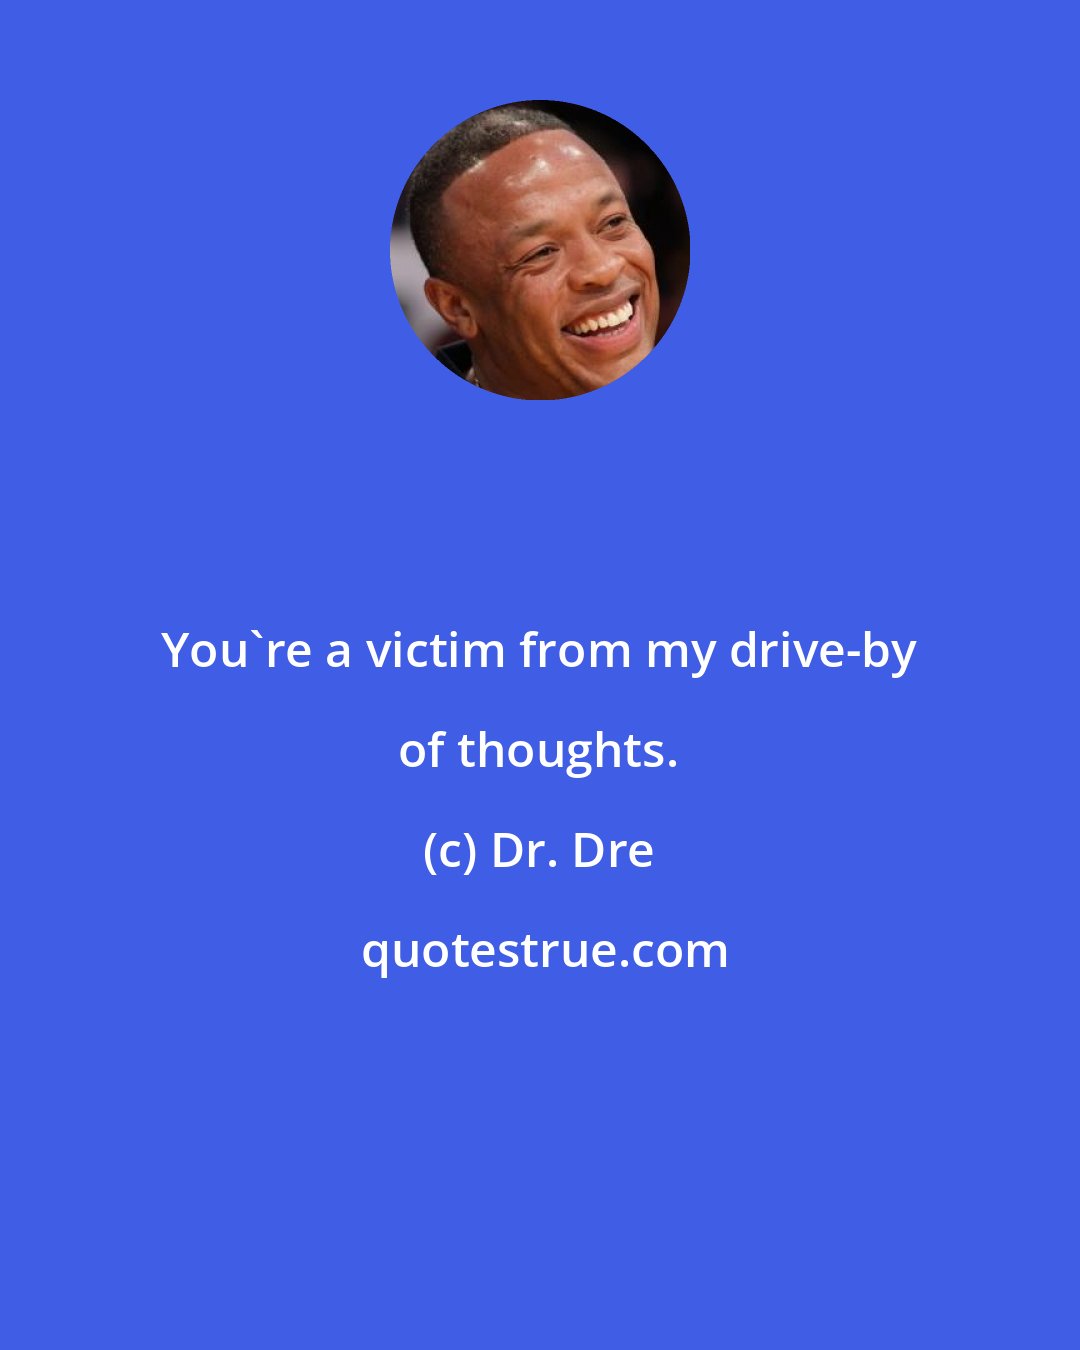 Dr. Dre: You're a victim from my drive-by of thoughts.